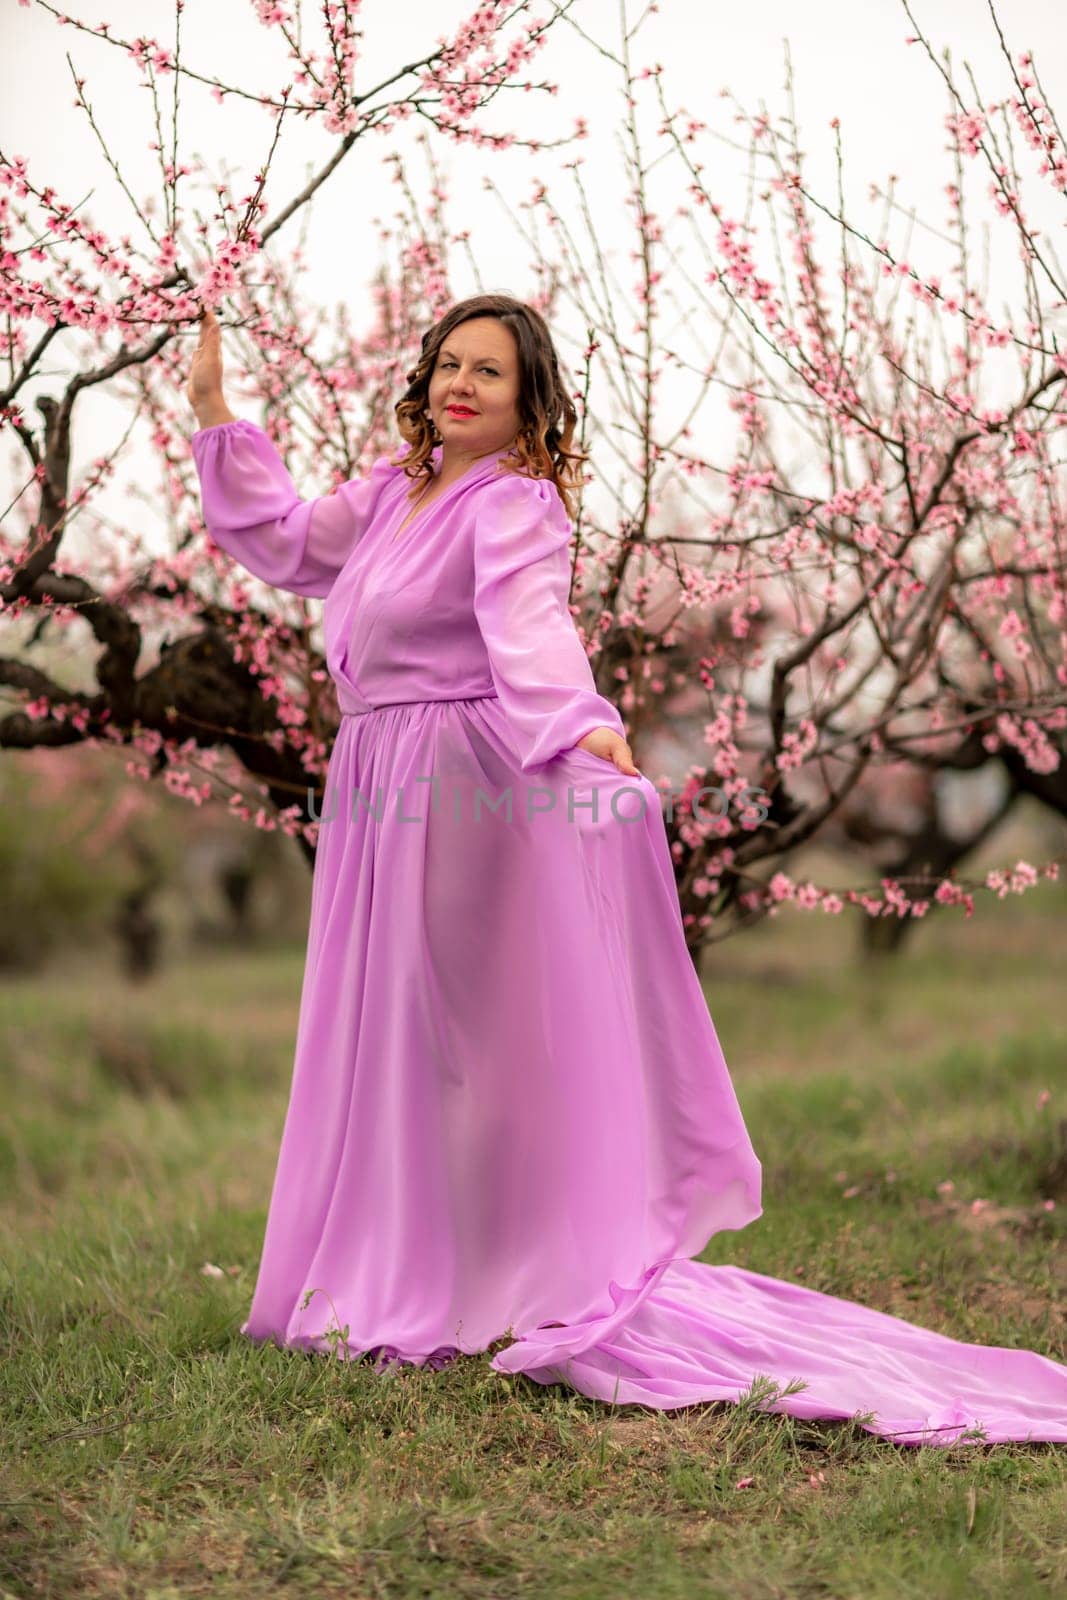 Woman peach blossom. Happy curly woman in pink dress walking in the garden of blossoming peach trees in spring by Matiunina